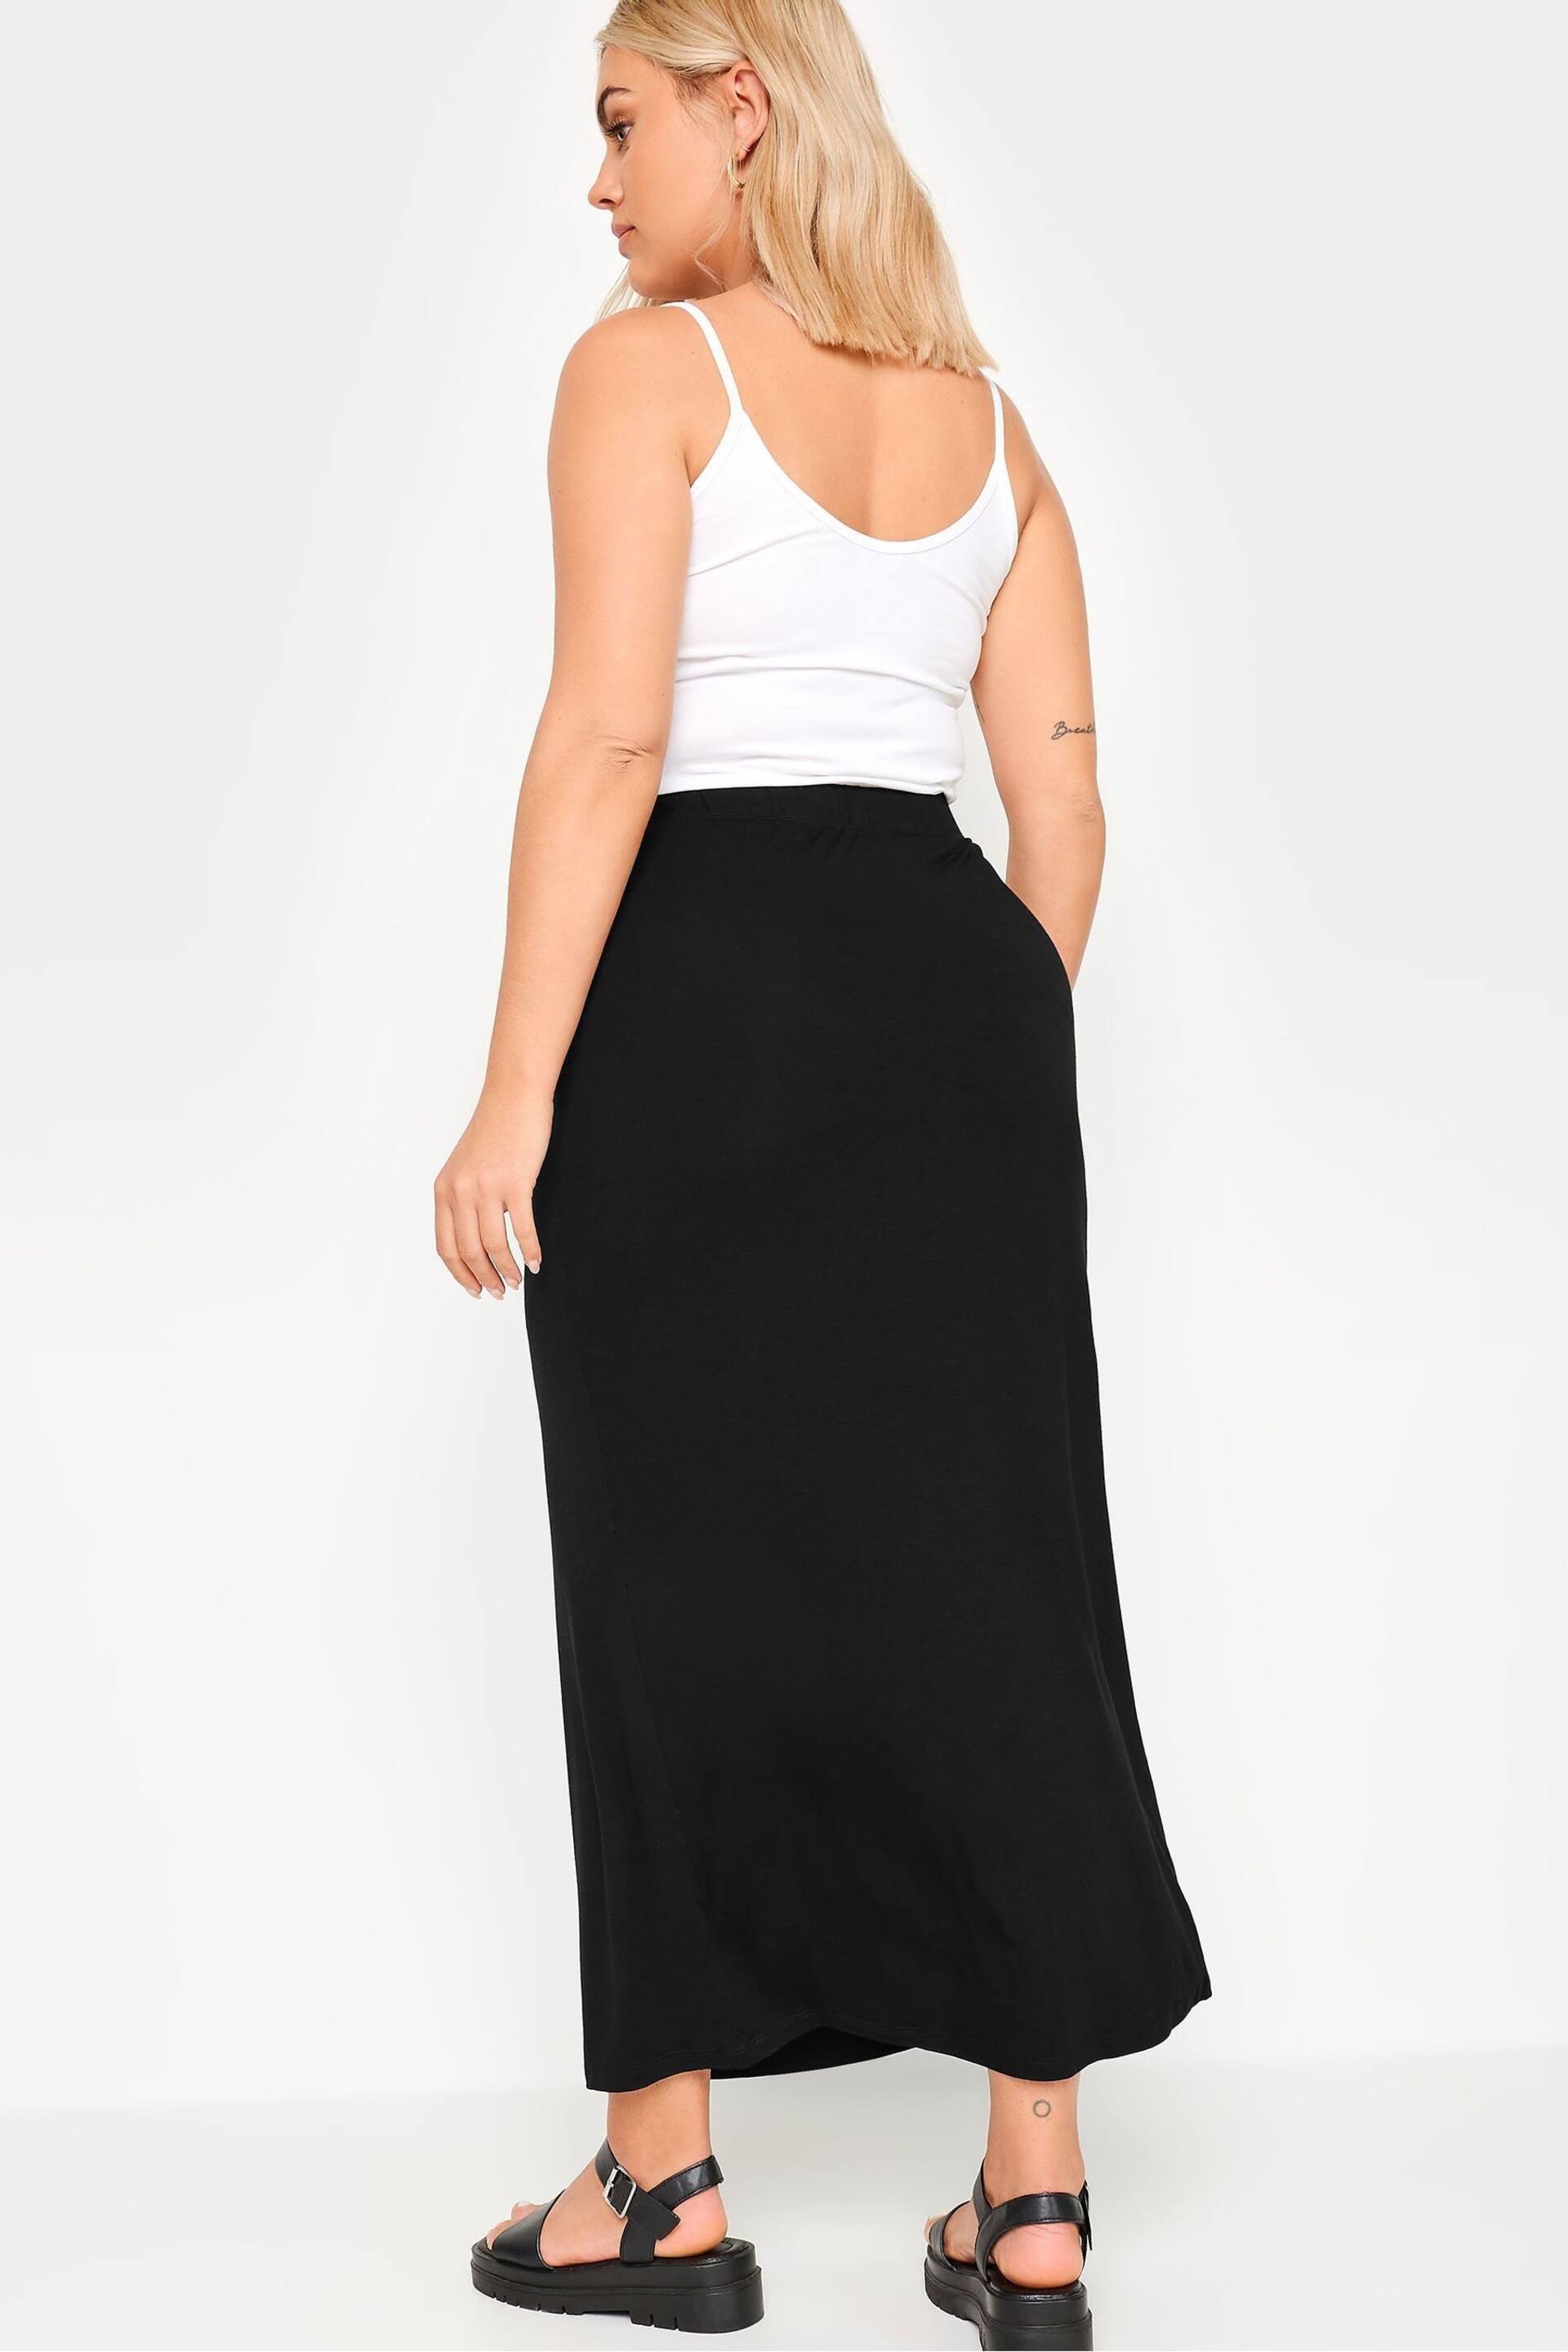 Yours Curve Black Tube Maxi Skirt - Image 2 of 5